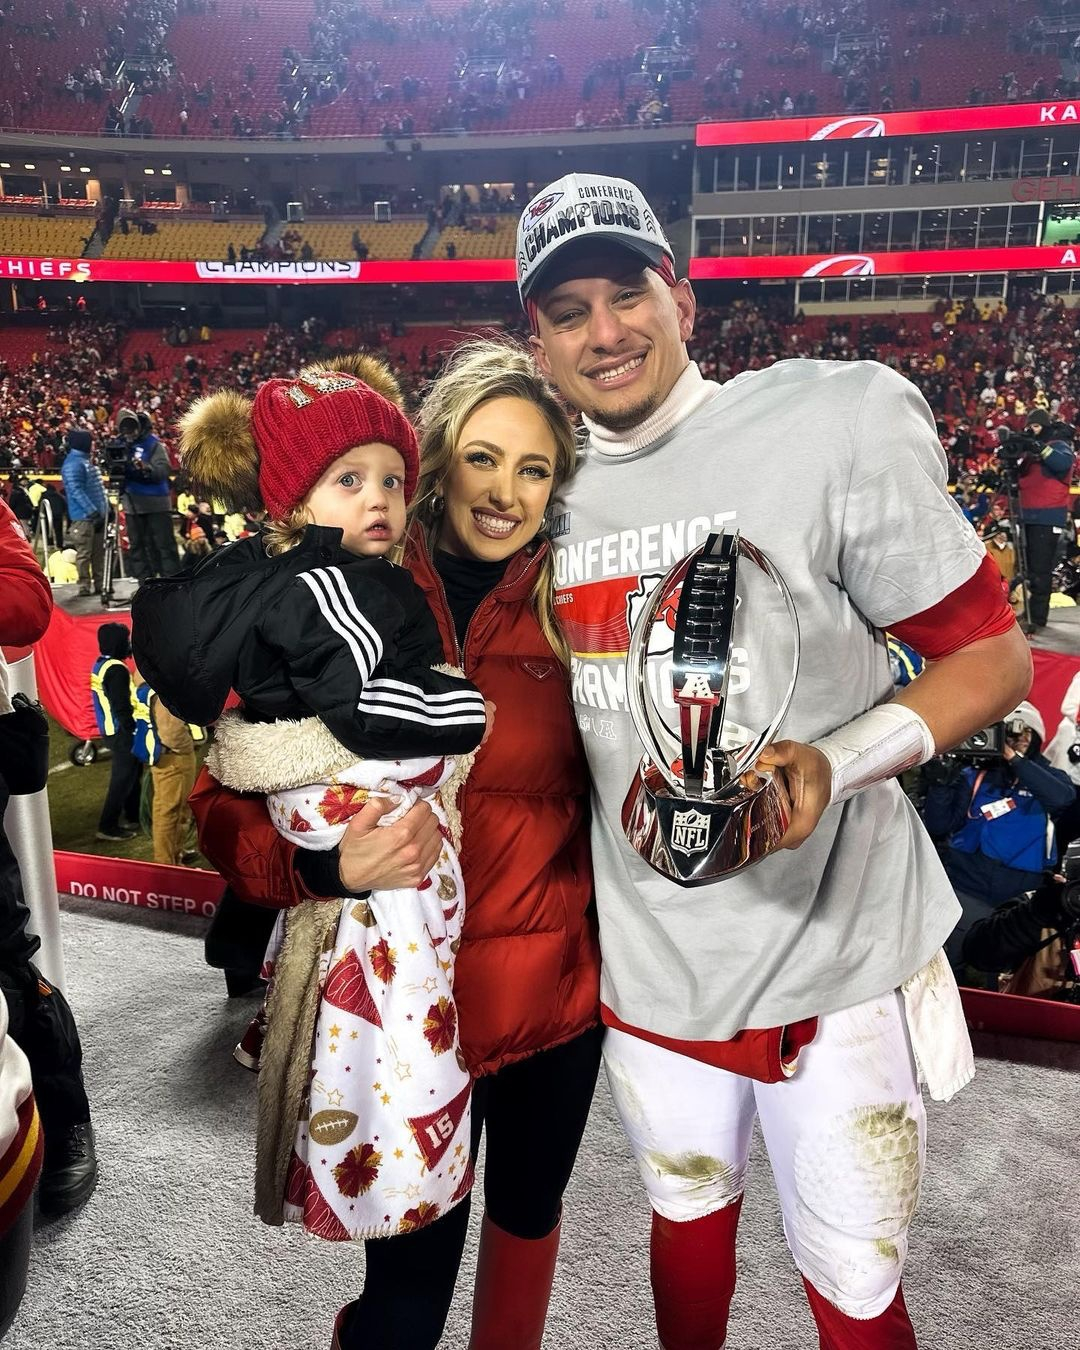 Patrick Mahomes' Wife Brittany Mahomes Claps Back at “Rude” Comments